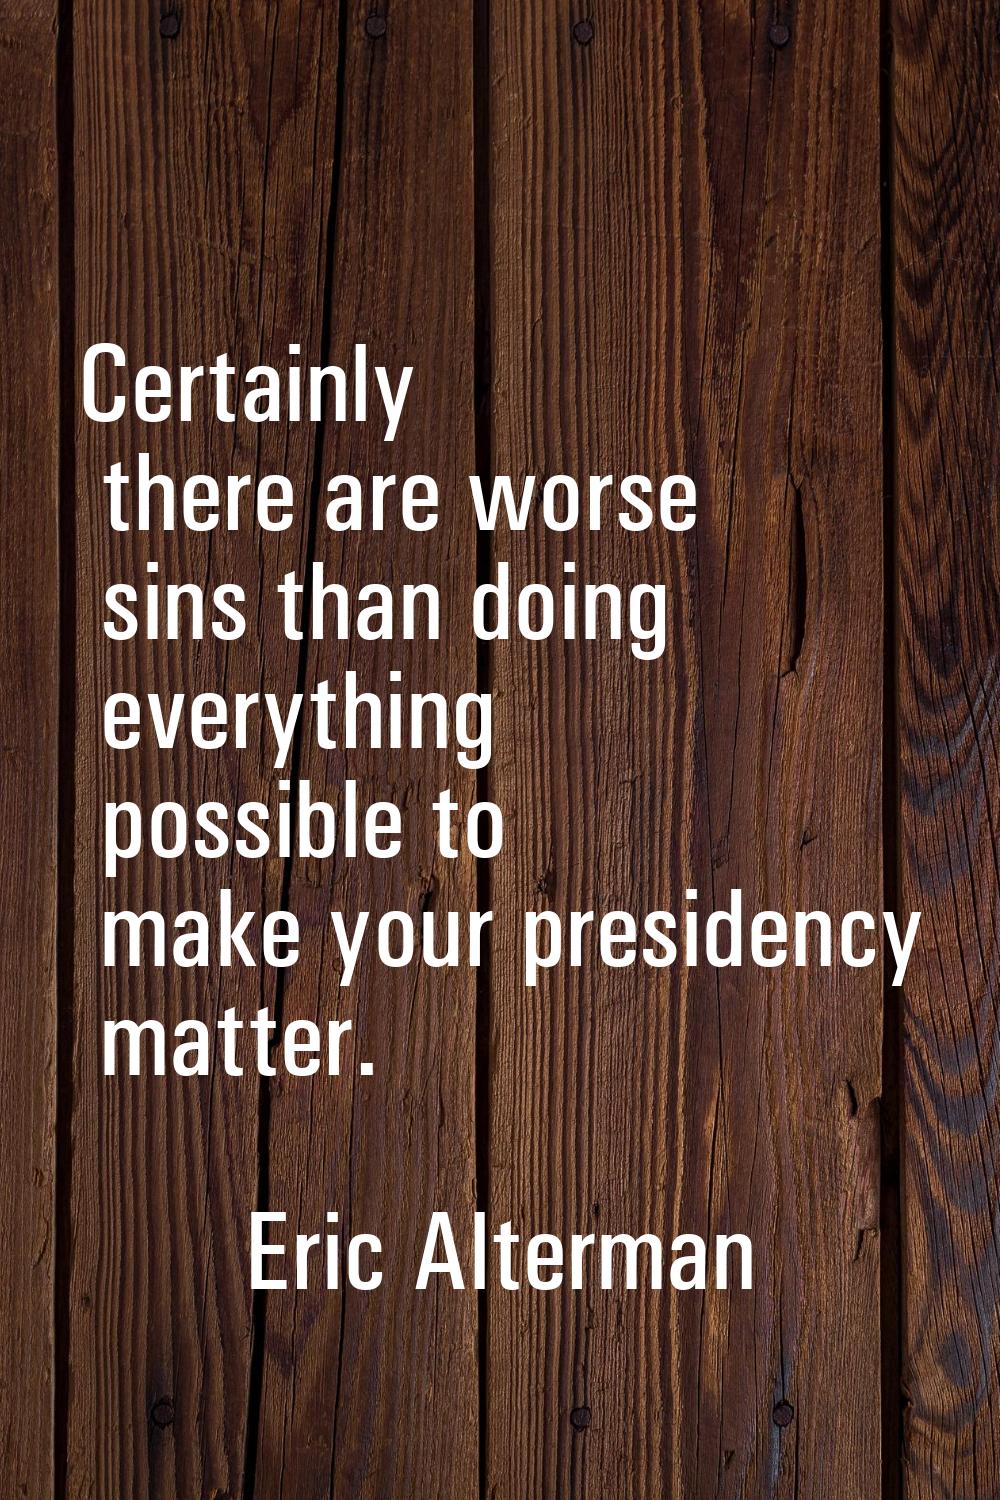 Certainly there are worse sins than doing everything possible to make your presidency matter.